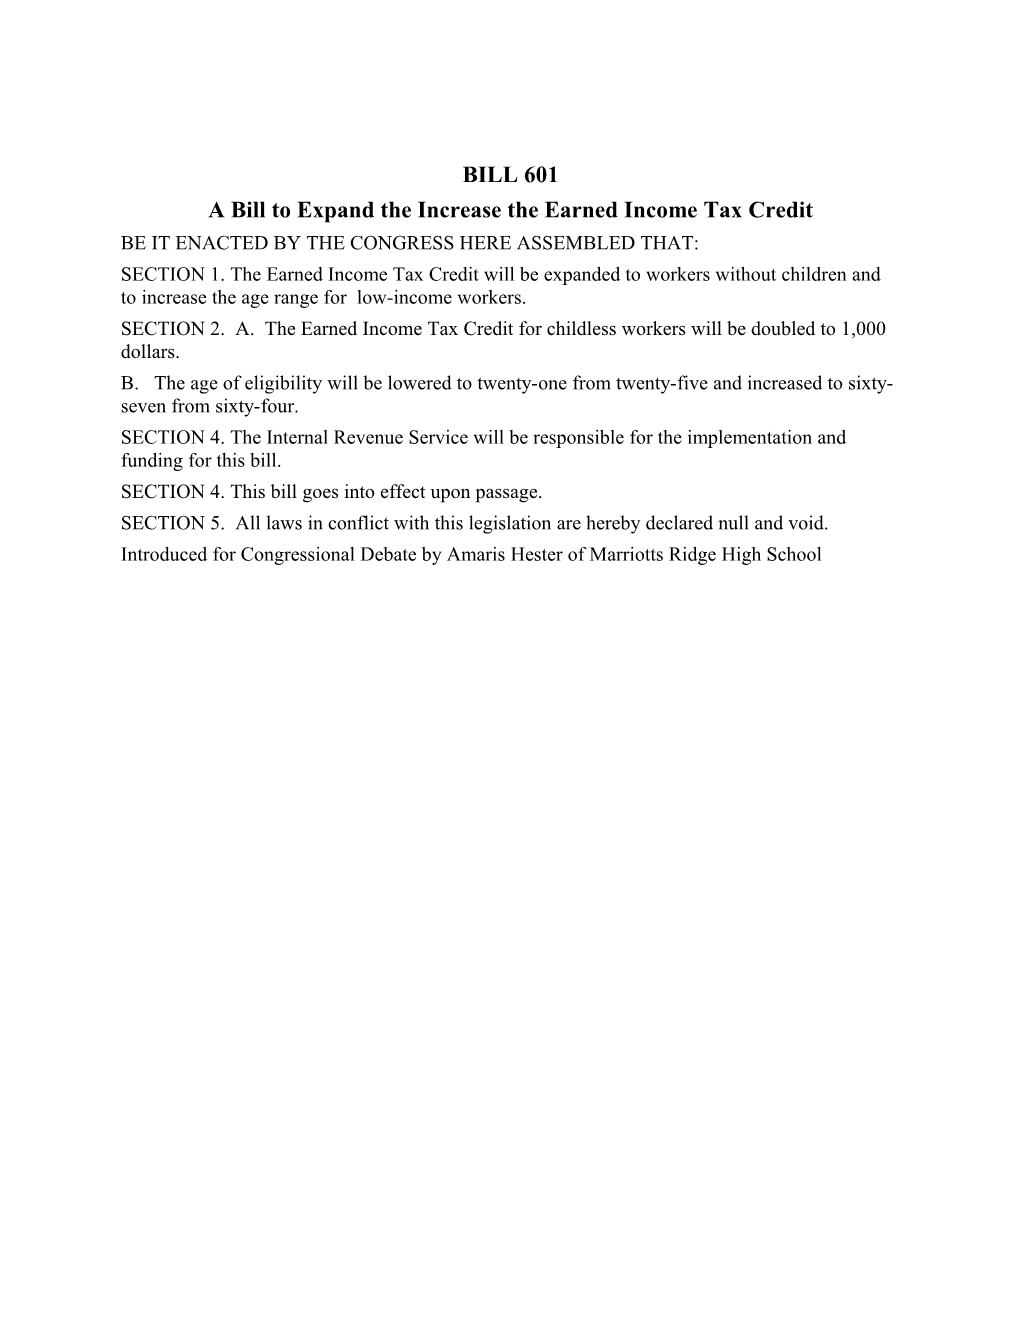 A Bill to Expand the Increase the Earned Income Tax Credit